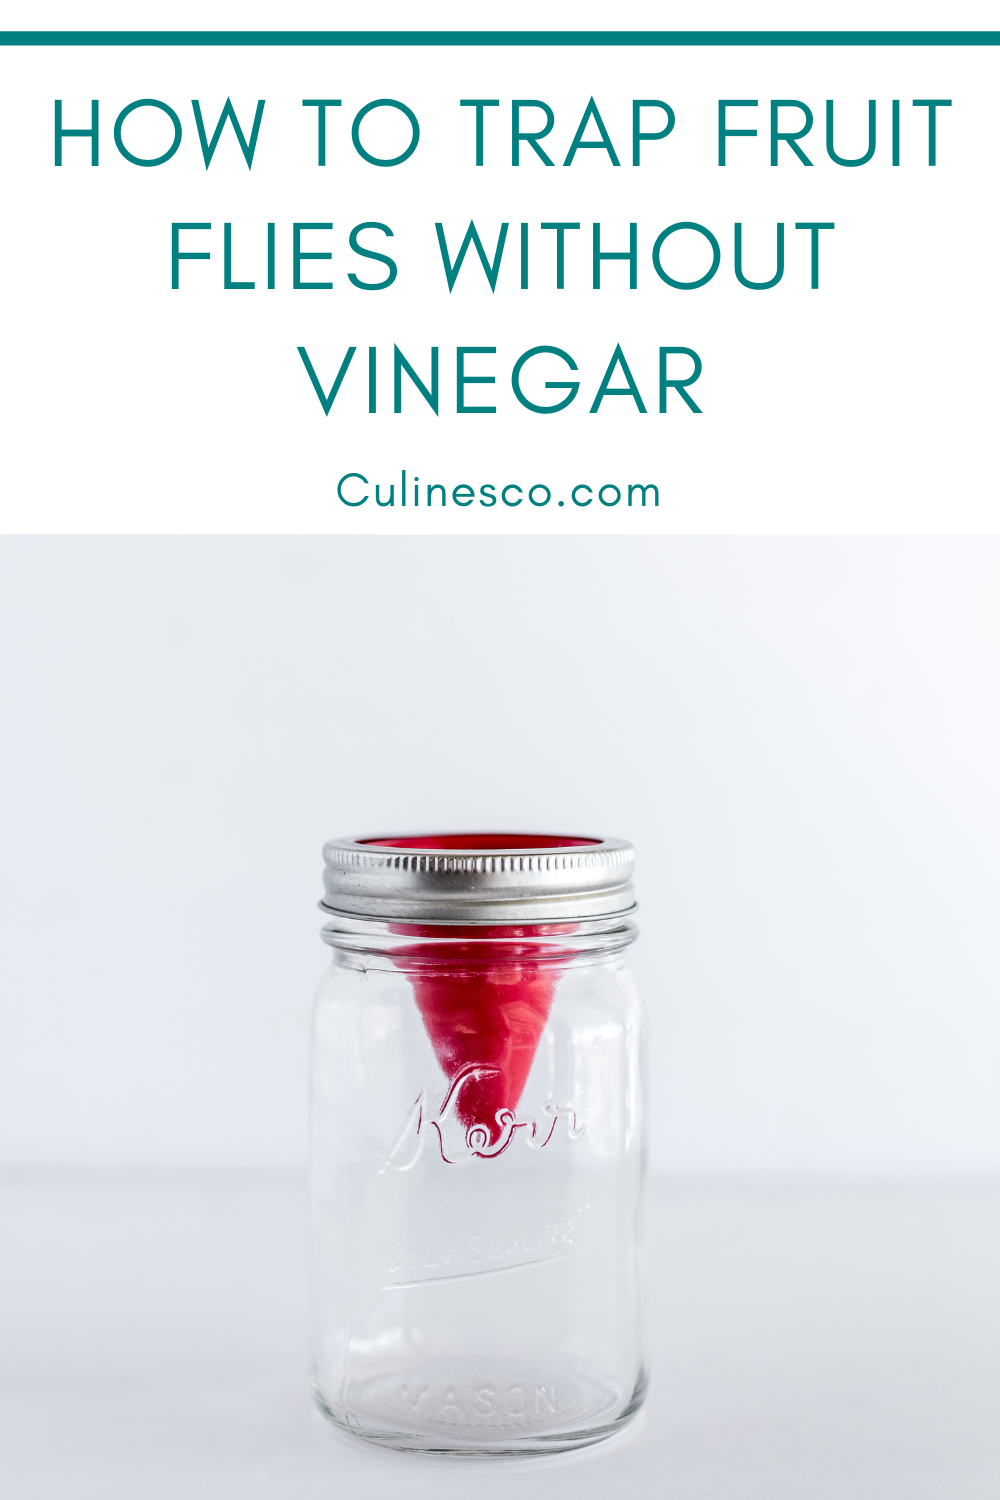 How to Trap Fruit Flies Without Vinegar - Culinesco - How To Get Rid Of Fruit Flies Without Vinegar